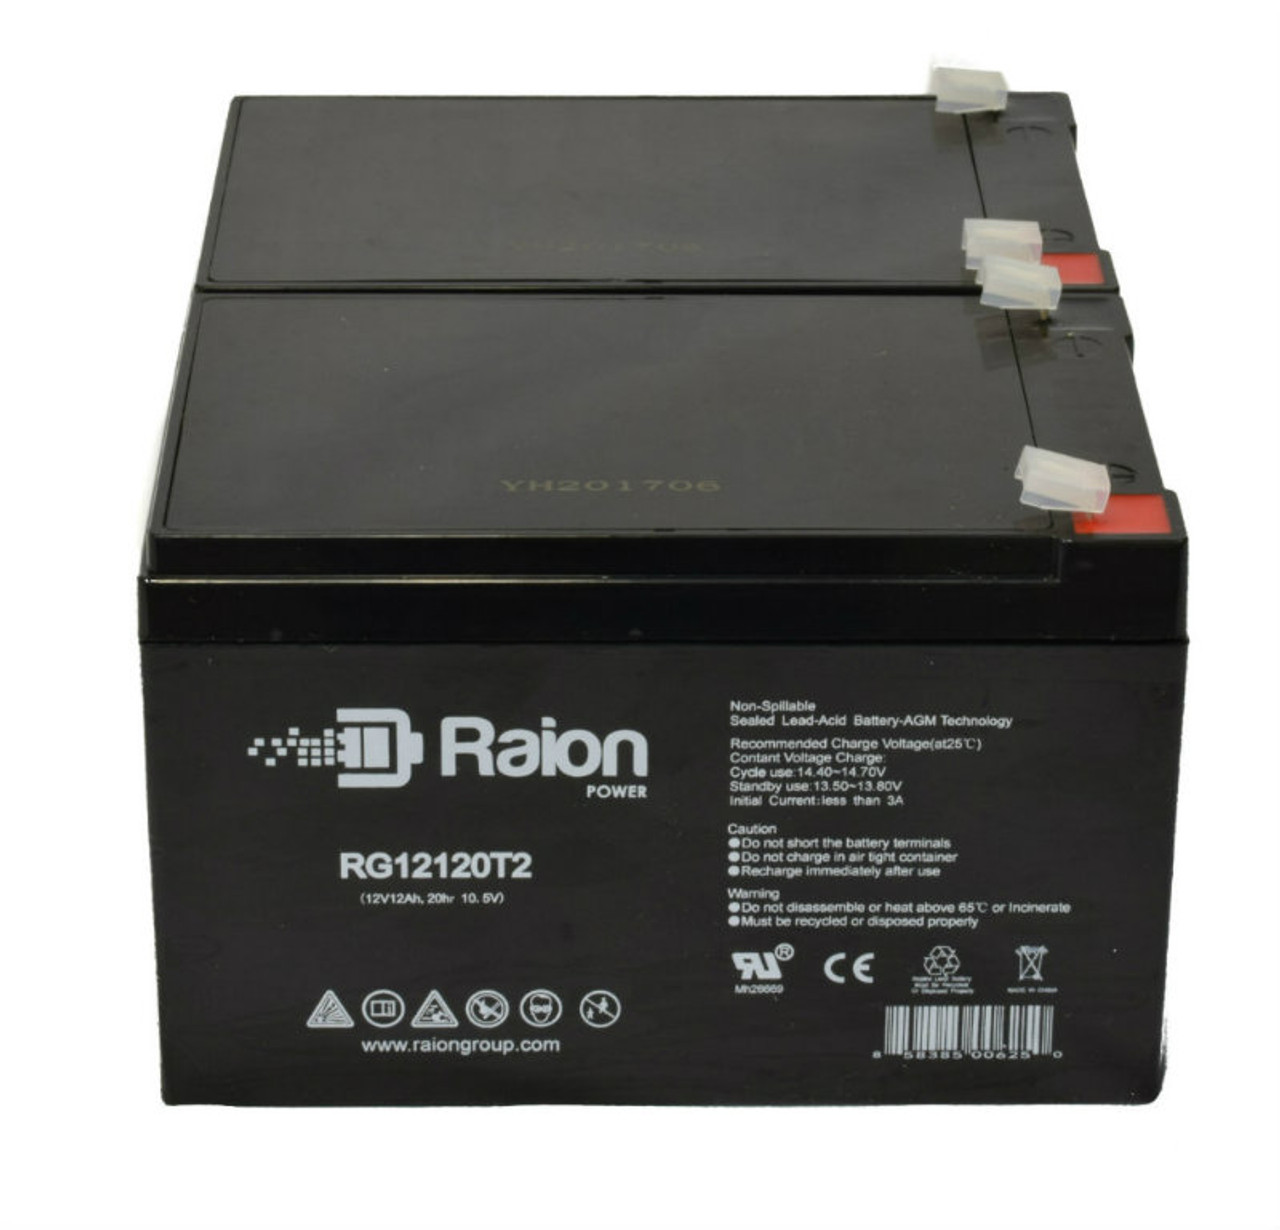 Raion Power 12V 12Ah Replacement Alarm Security System Battery for Altronix AL1012ULM - 2 Pack